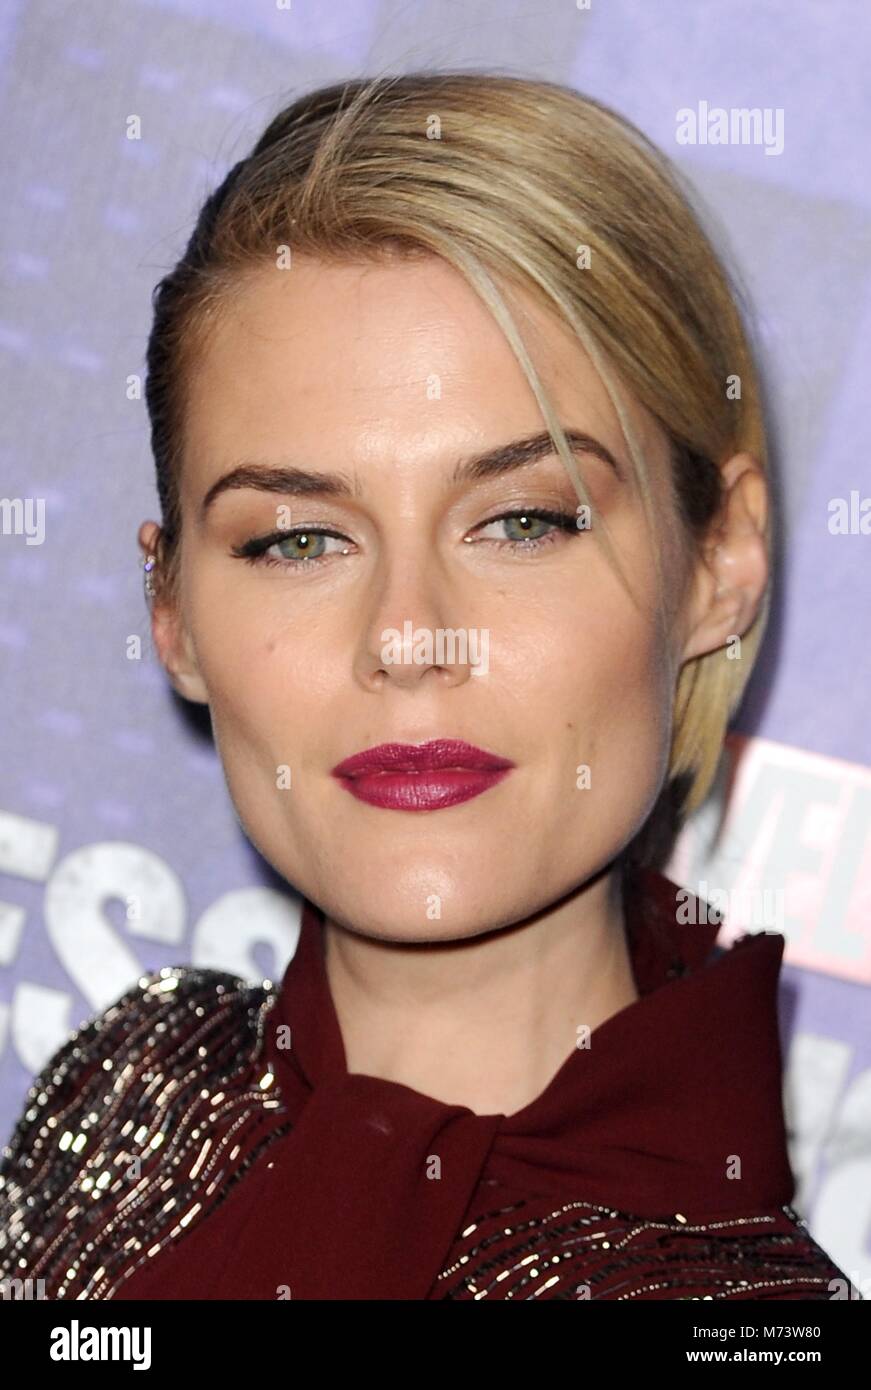 Rachael Taylor at arrivals for MARVEL’S JESSICA JONES Season 2 Premiere, AMC Loews Lincoln Square, New York, NY March 7, 2018. Photo By: Kristin Callahan/Everett Collection Stock Photo